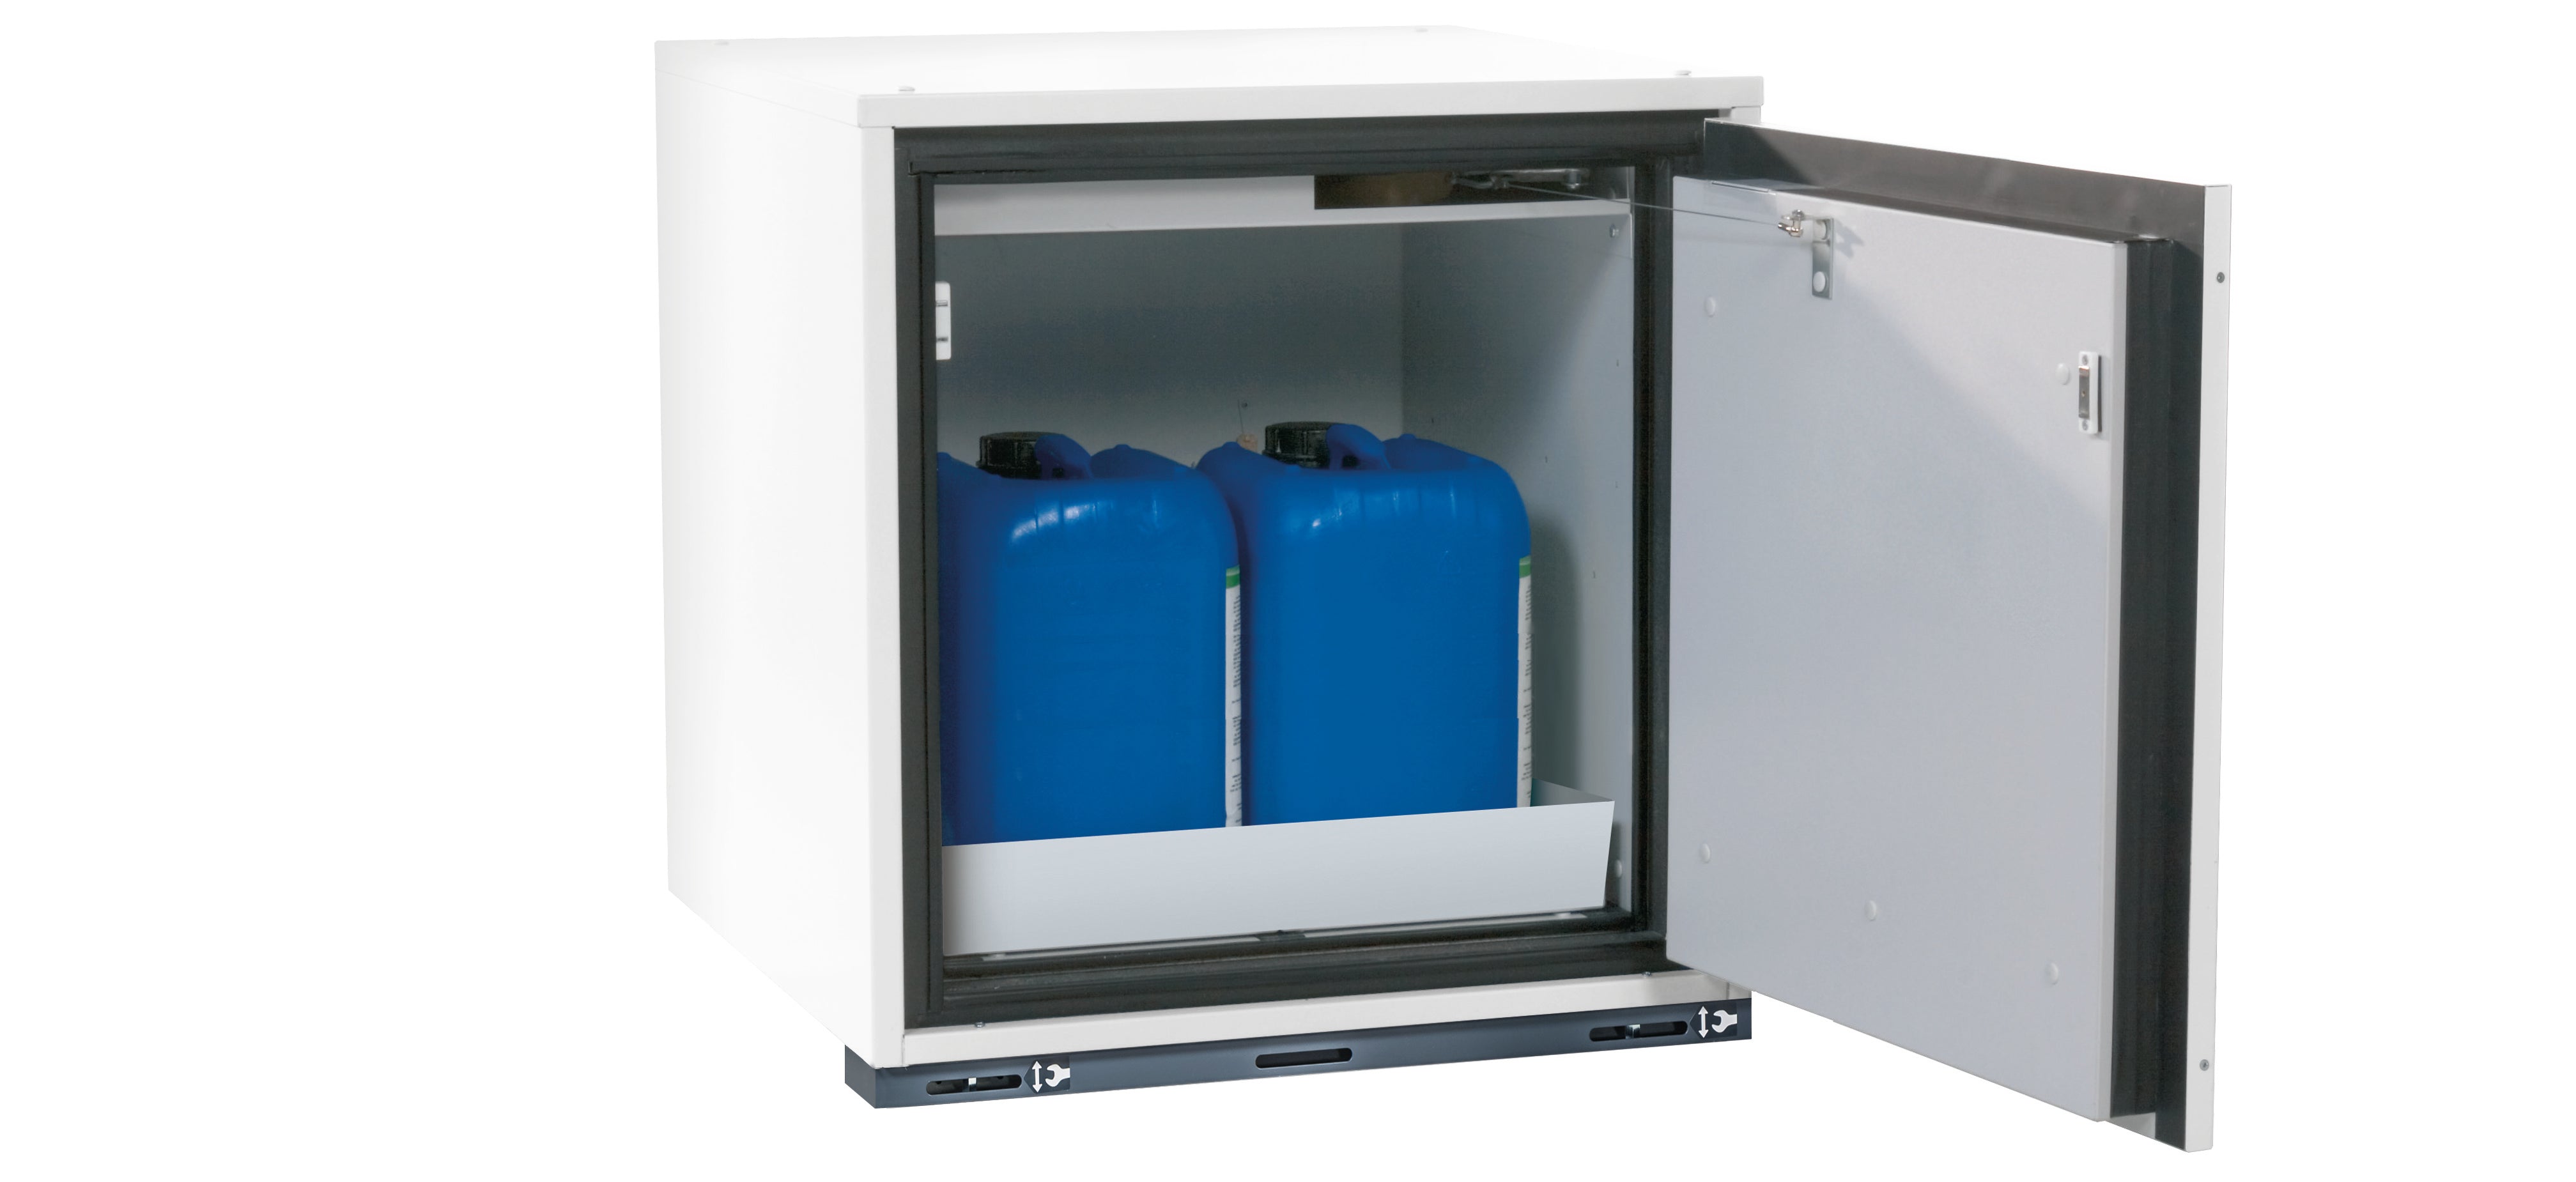 Type 90 safety base cabinet UB-T-90 model UB90.060.059.UL.TR in laboratory white (similar to RAL 9016) with 1x perforated sheet insert standard (sheet steel)